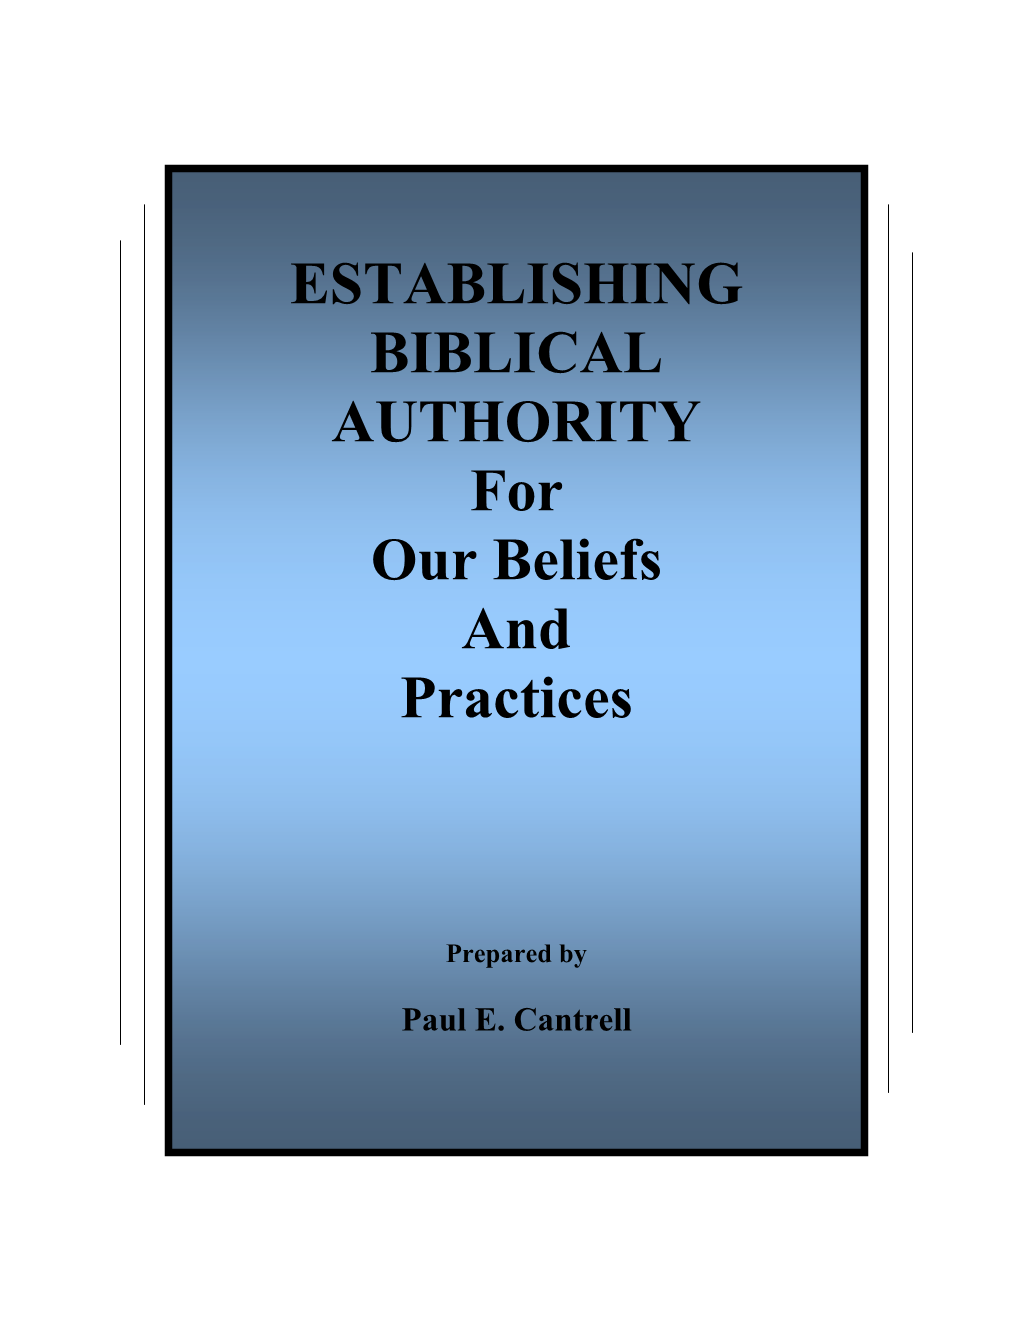 ESTABLISHING BIBLICAL AUTHORITY for Our Beliefs and Practices